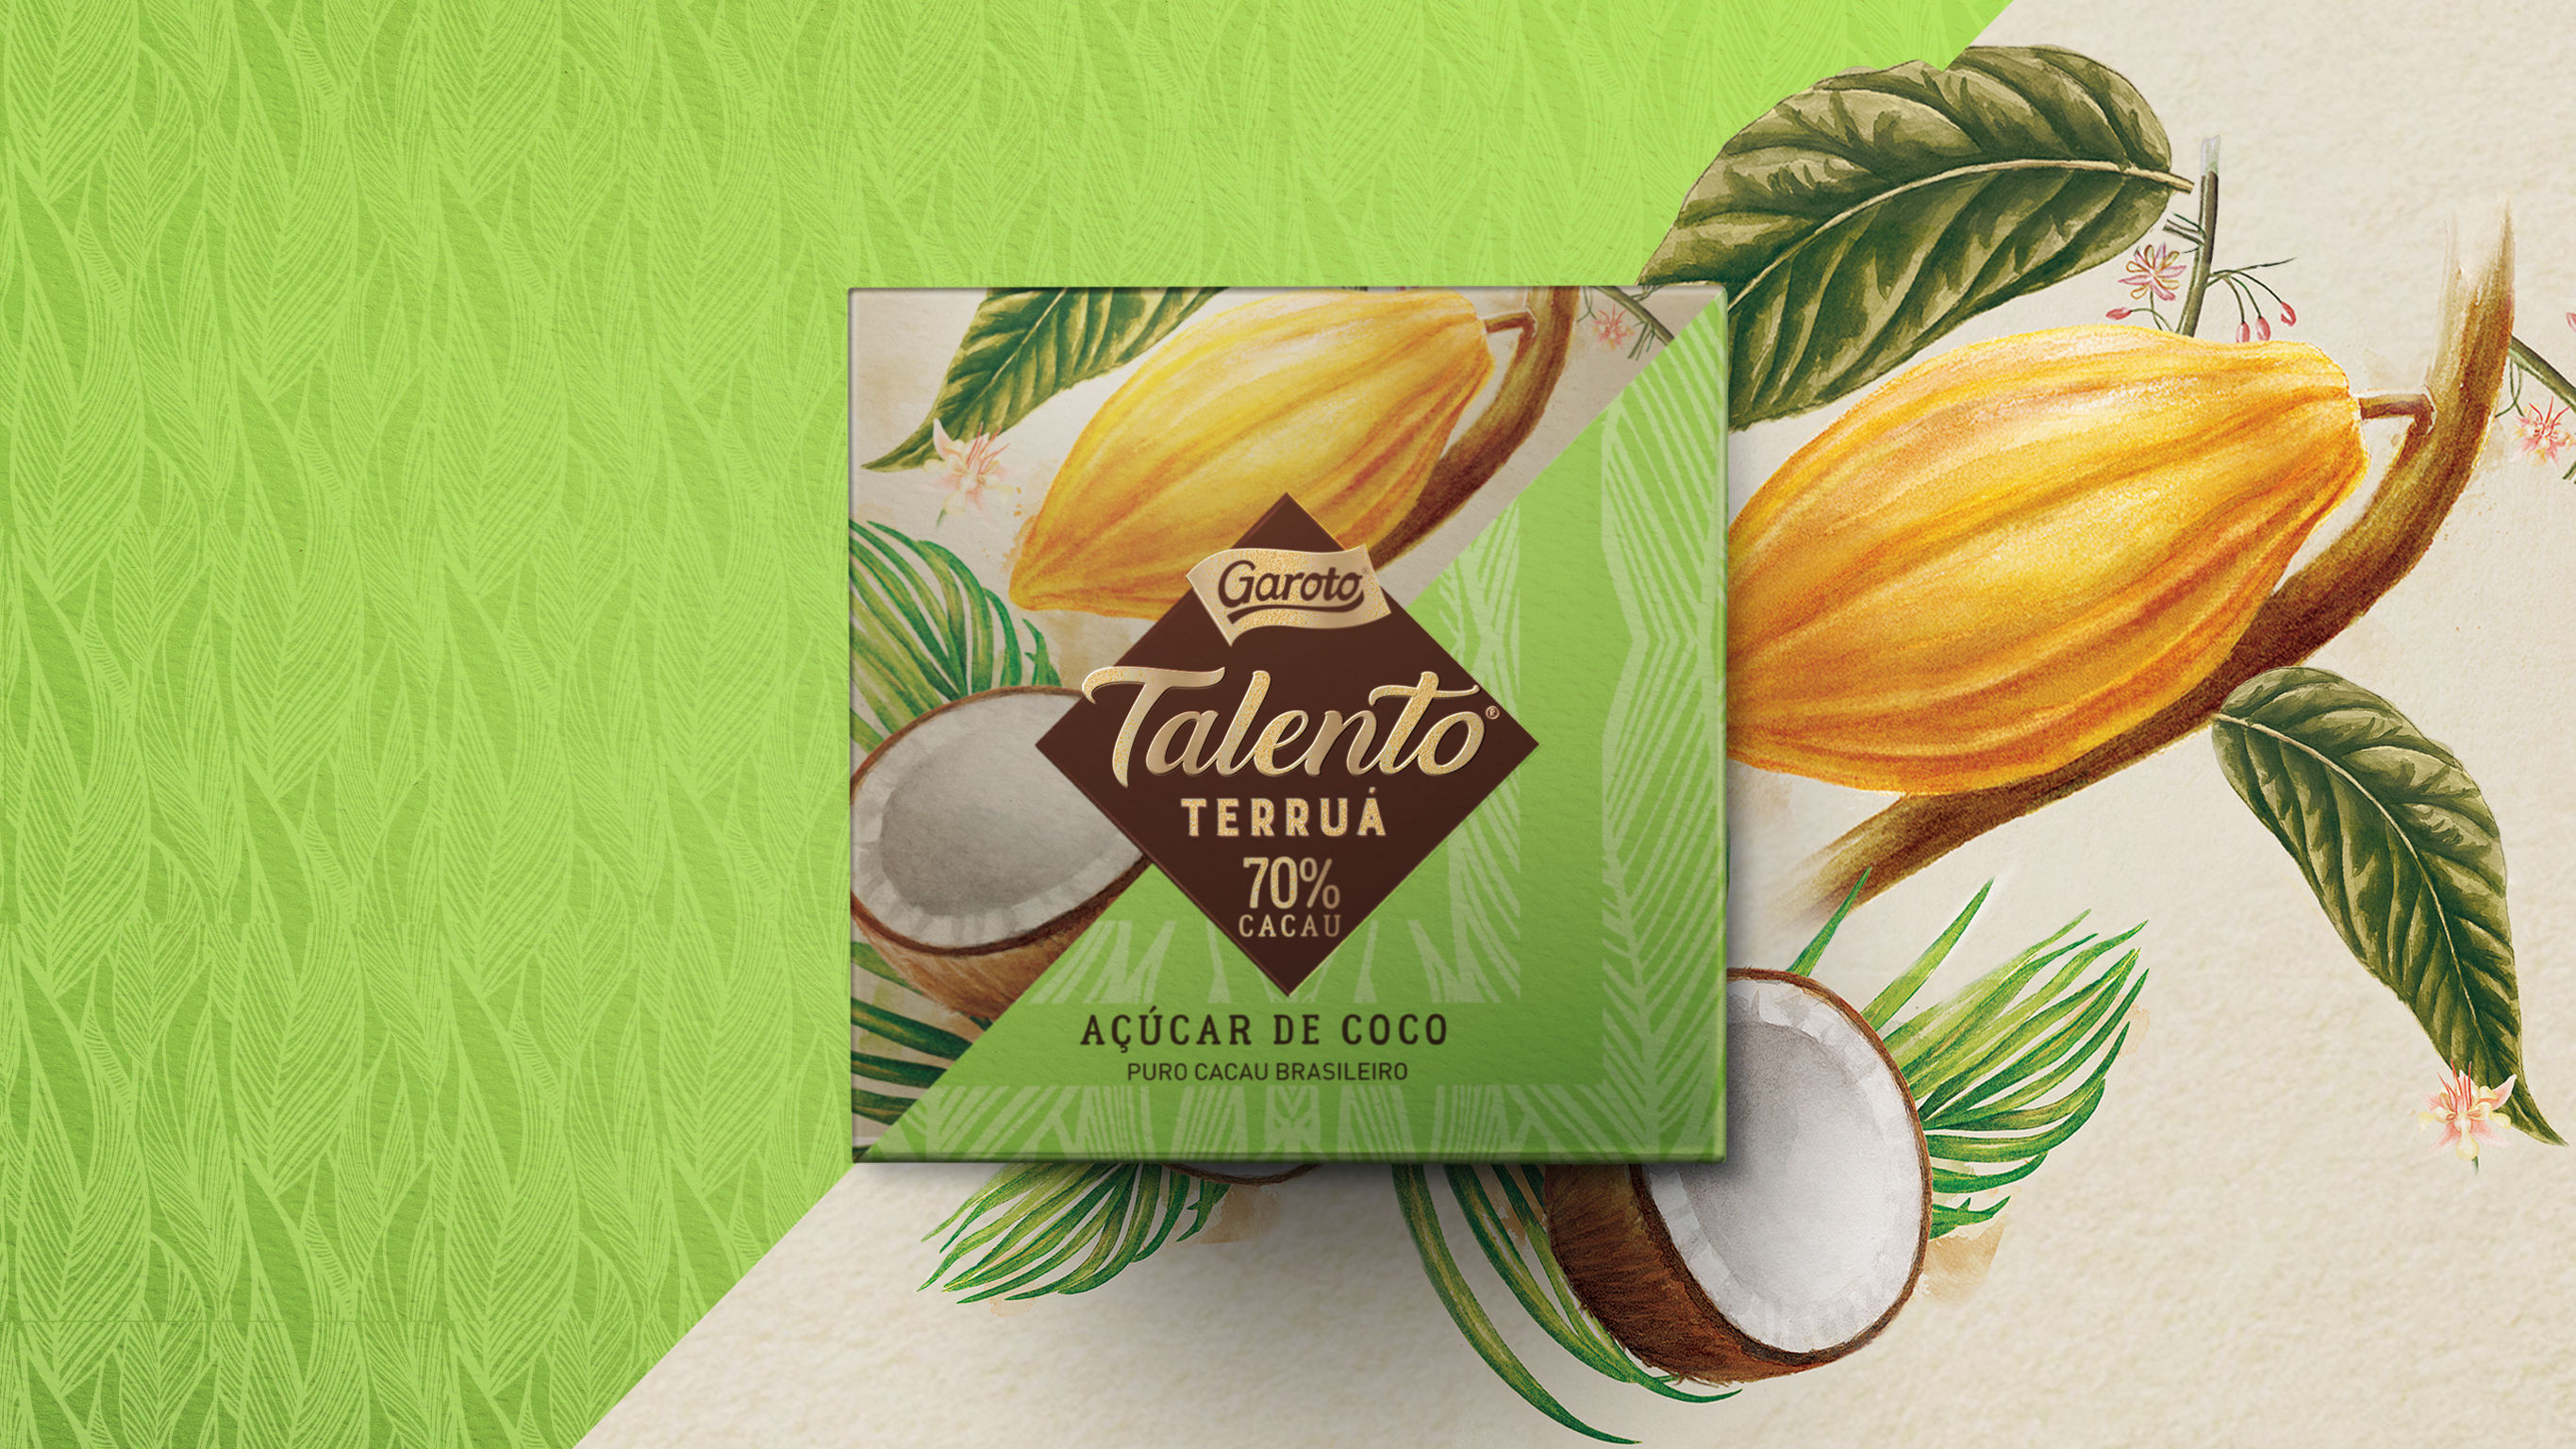 Talento limited edition pack: Terruá